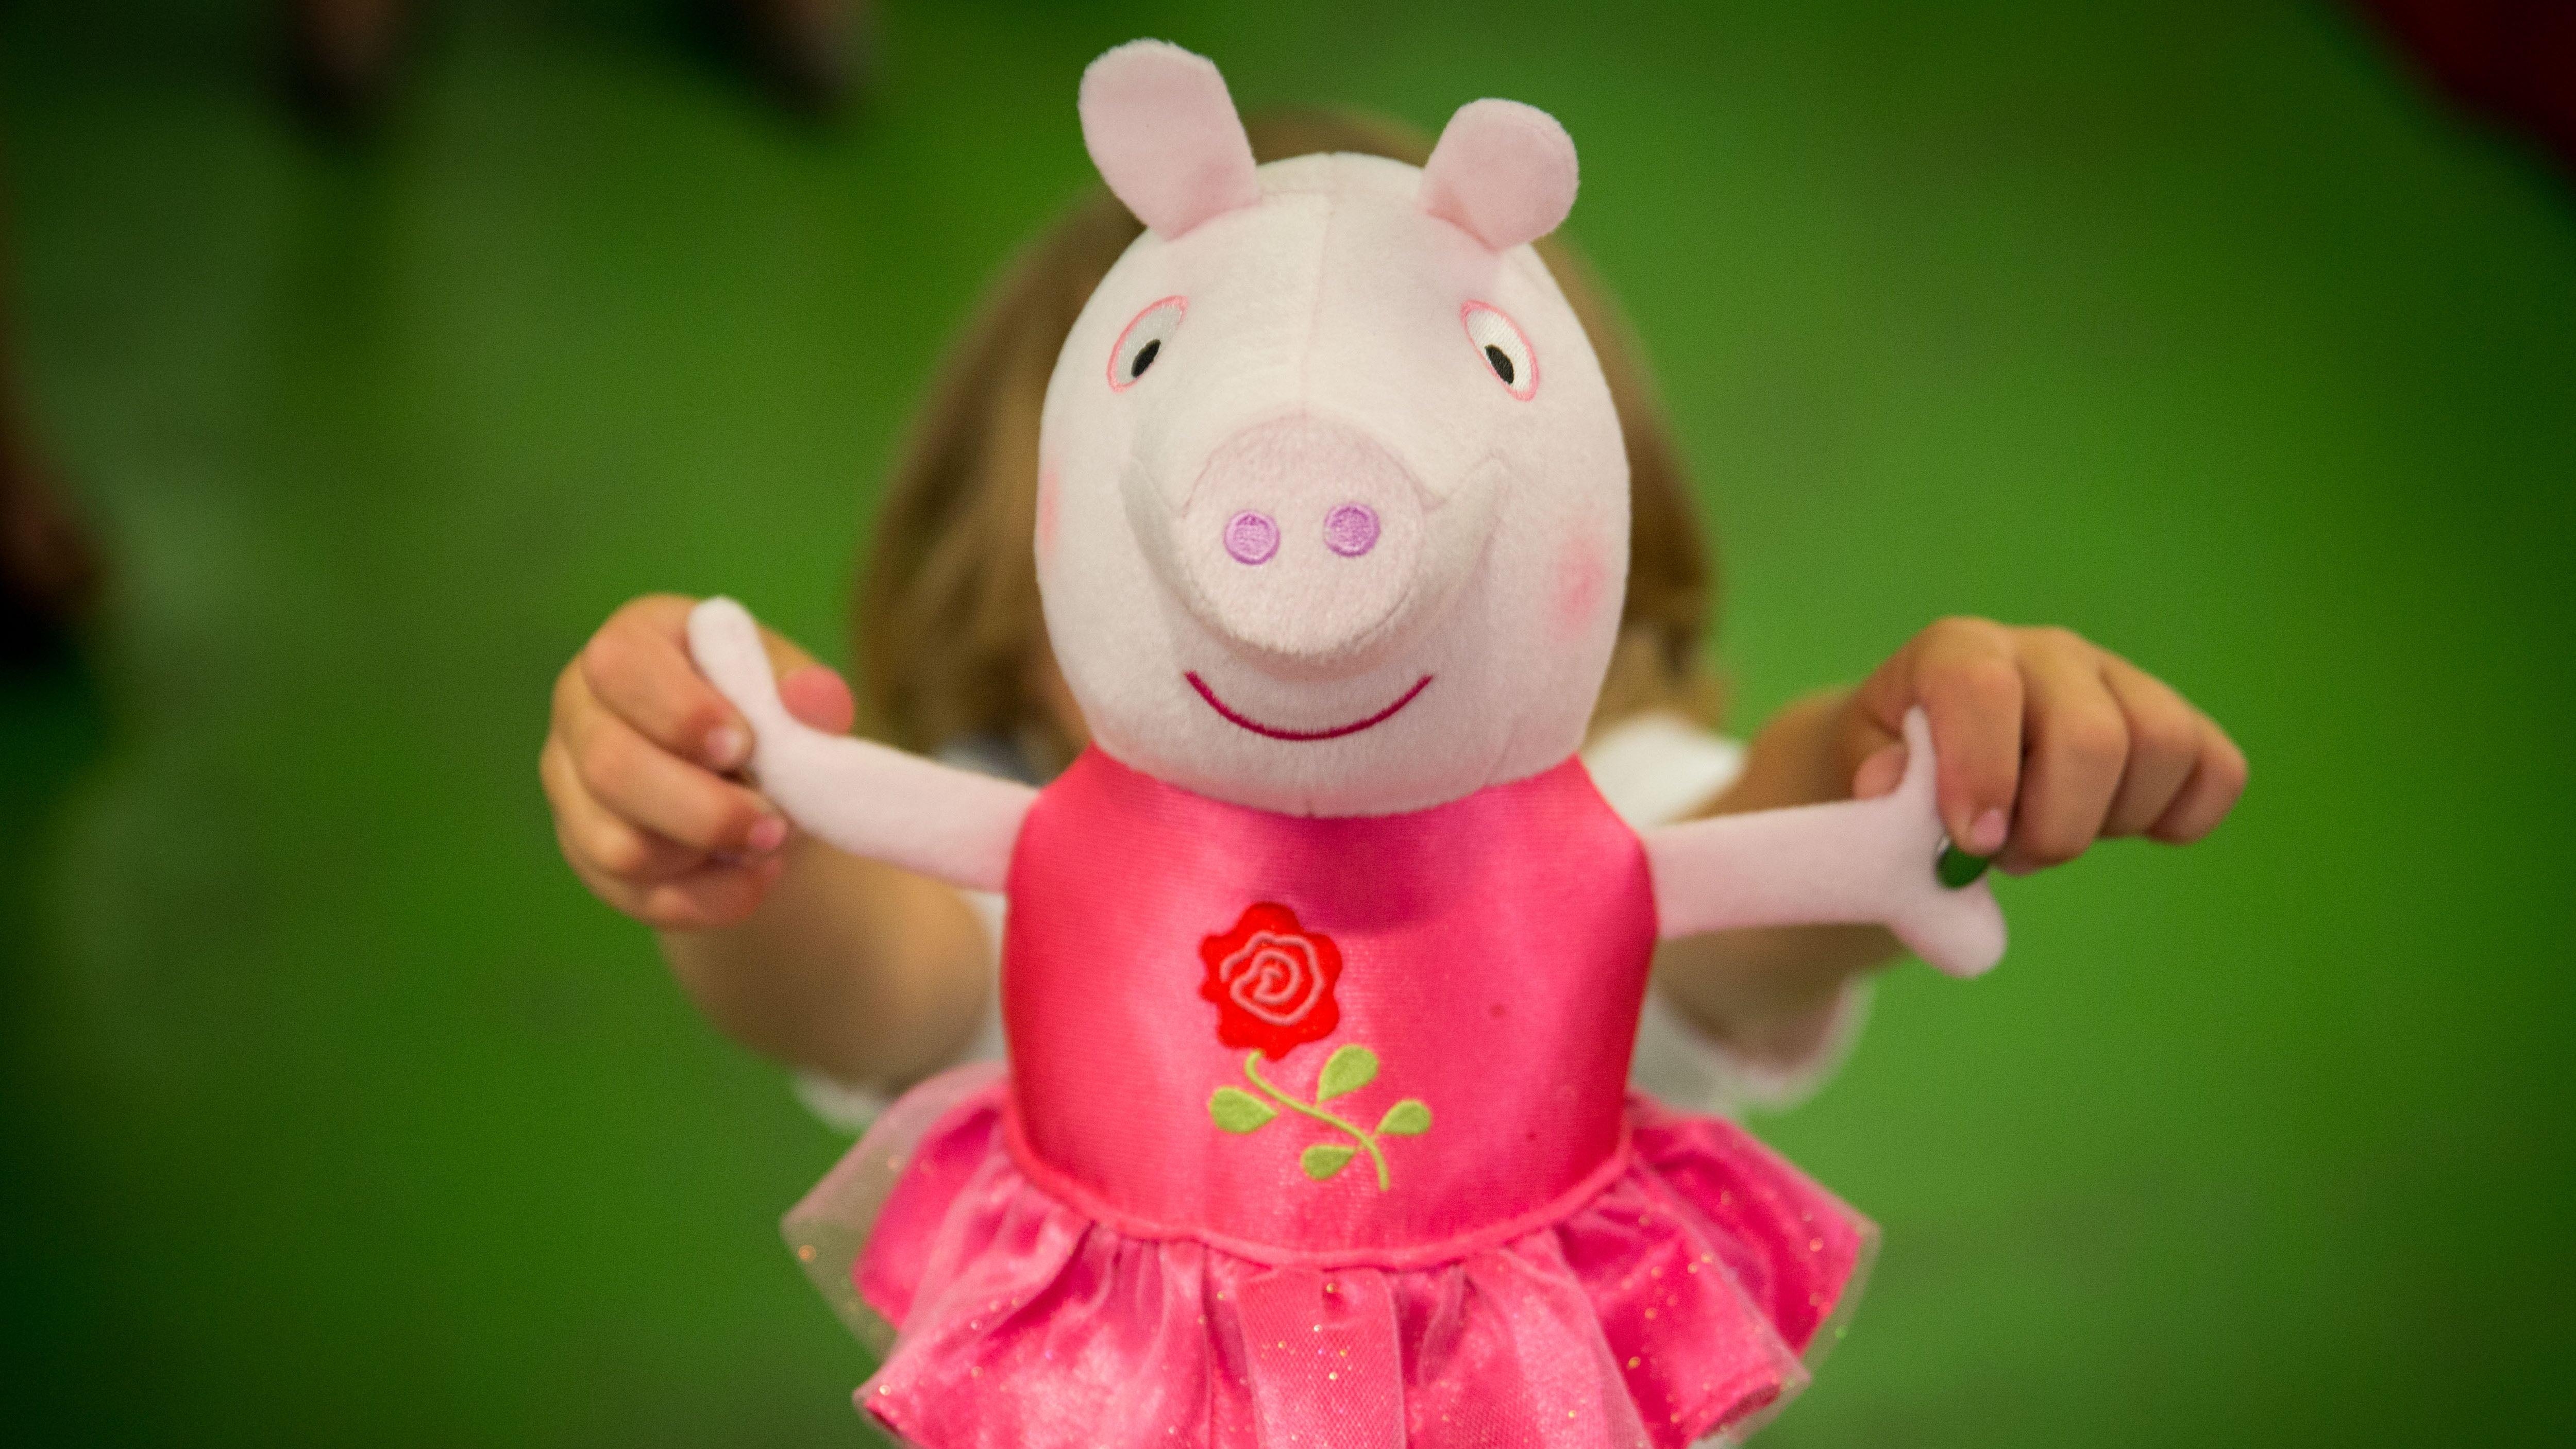 The Queen’s agent, Peppa Pig, has American kids talking all British again